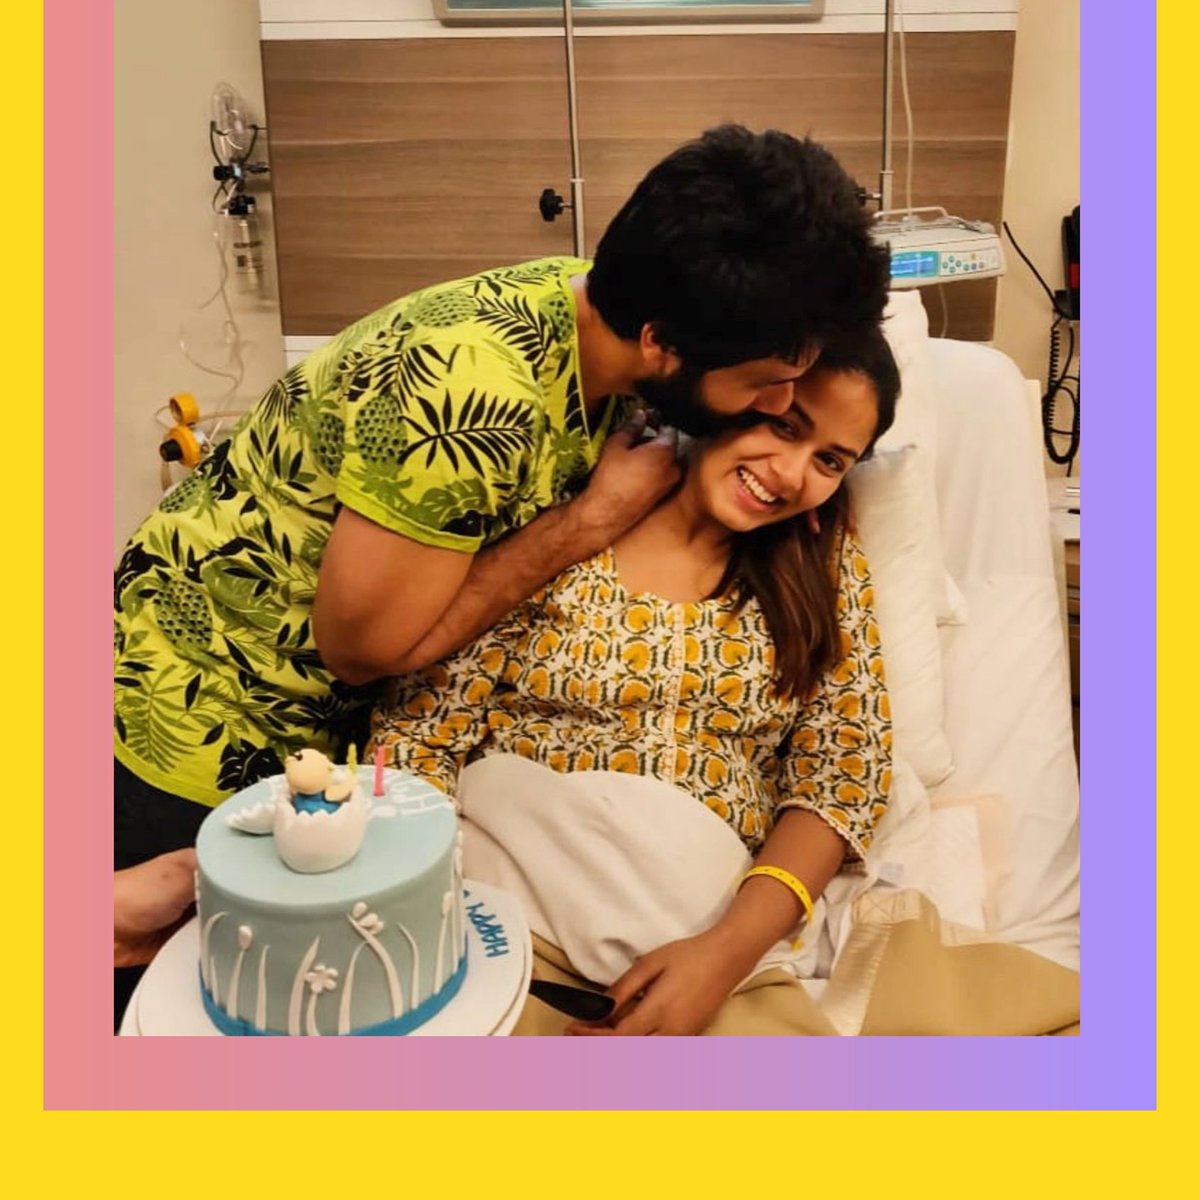 Mira Kapoor shares a throwback picture with hubby @shahidkapoor when Zainu was just a day old💕

How many hearts for them ?

#ShahidKapoor #MiraKapoor #ZainKapoor #Throwback #Bollywood #PopDiaries